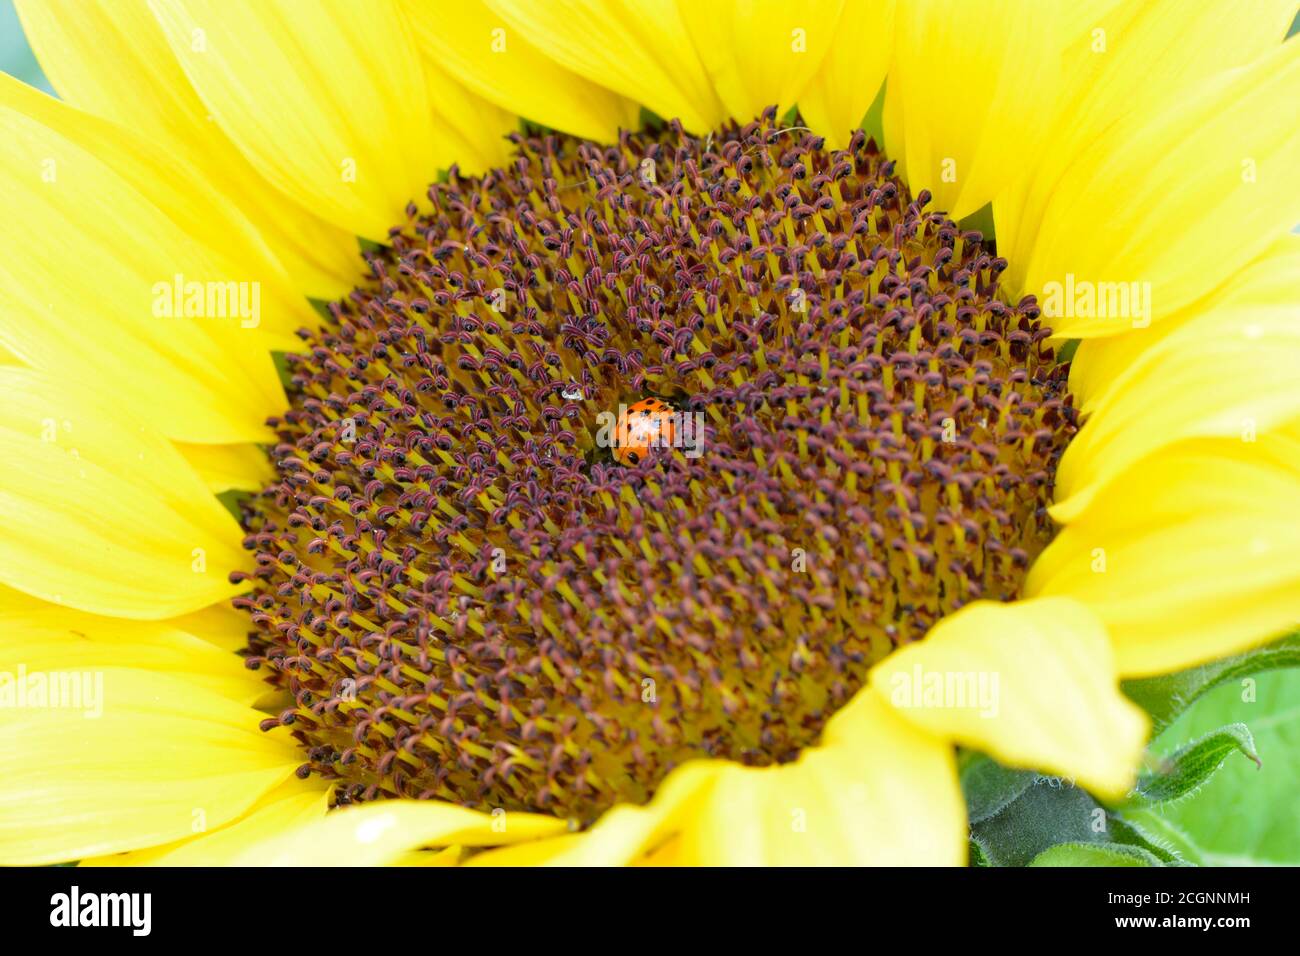 ladybird in the centre of a sunflower bloom Stock Photo